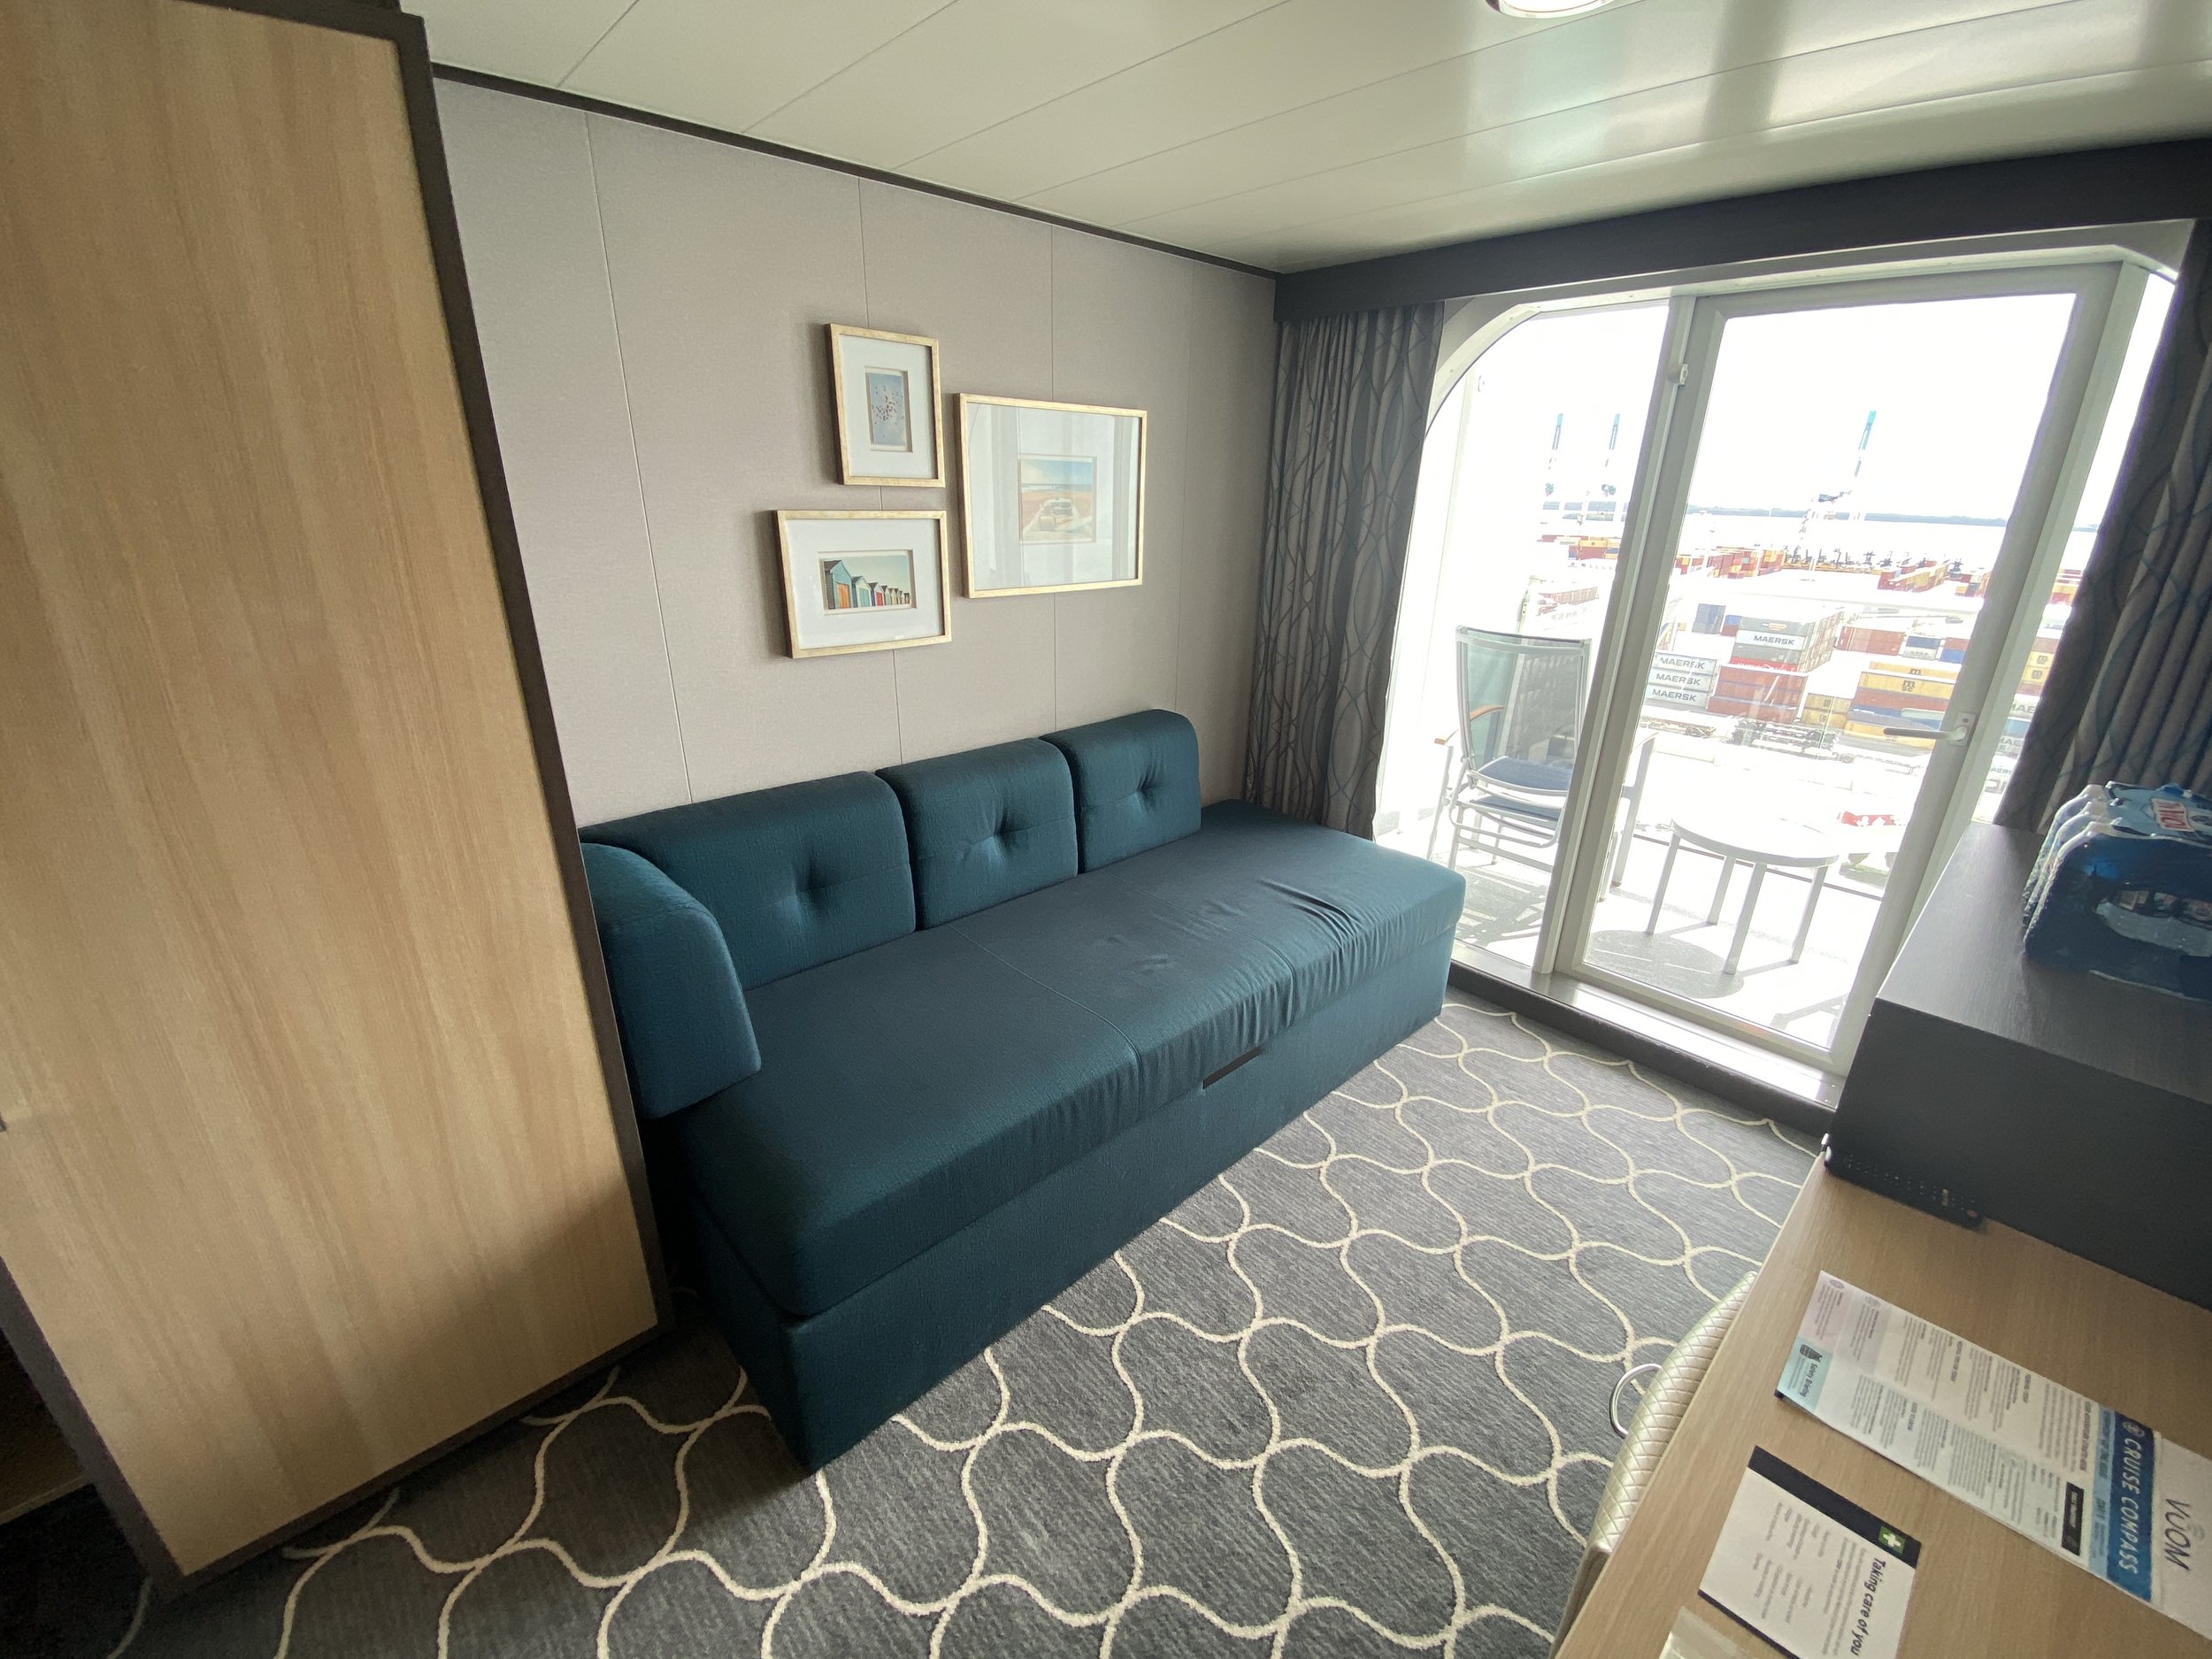  Our stateroom was set up to sleep 3 guests. The sofa converts into a twin size day bed. The stateroom attendant sets it up during turndown service each evening. 